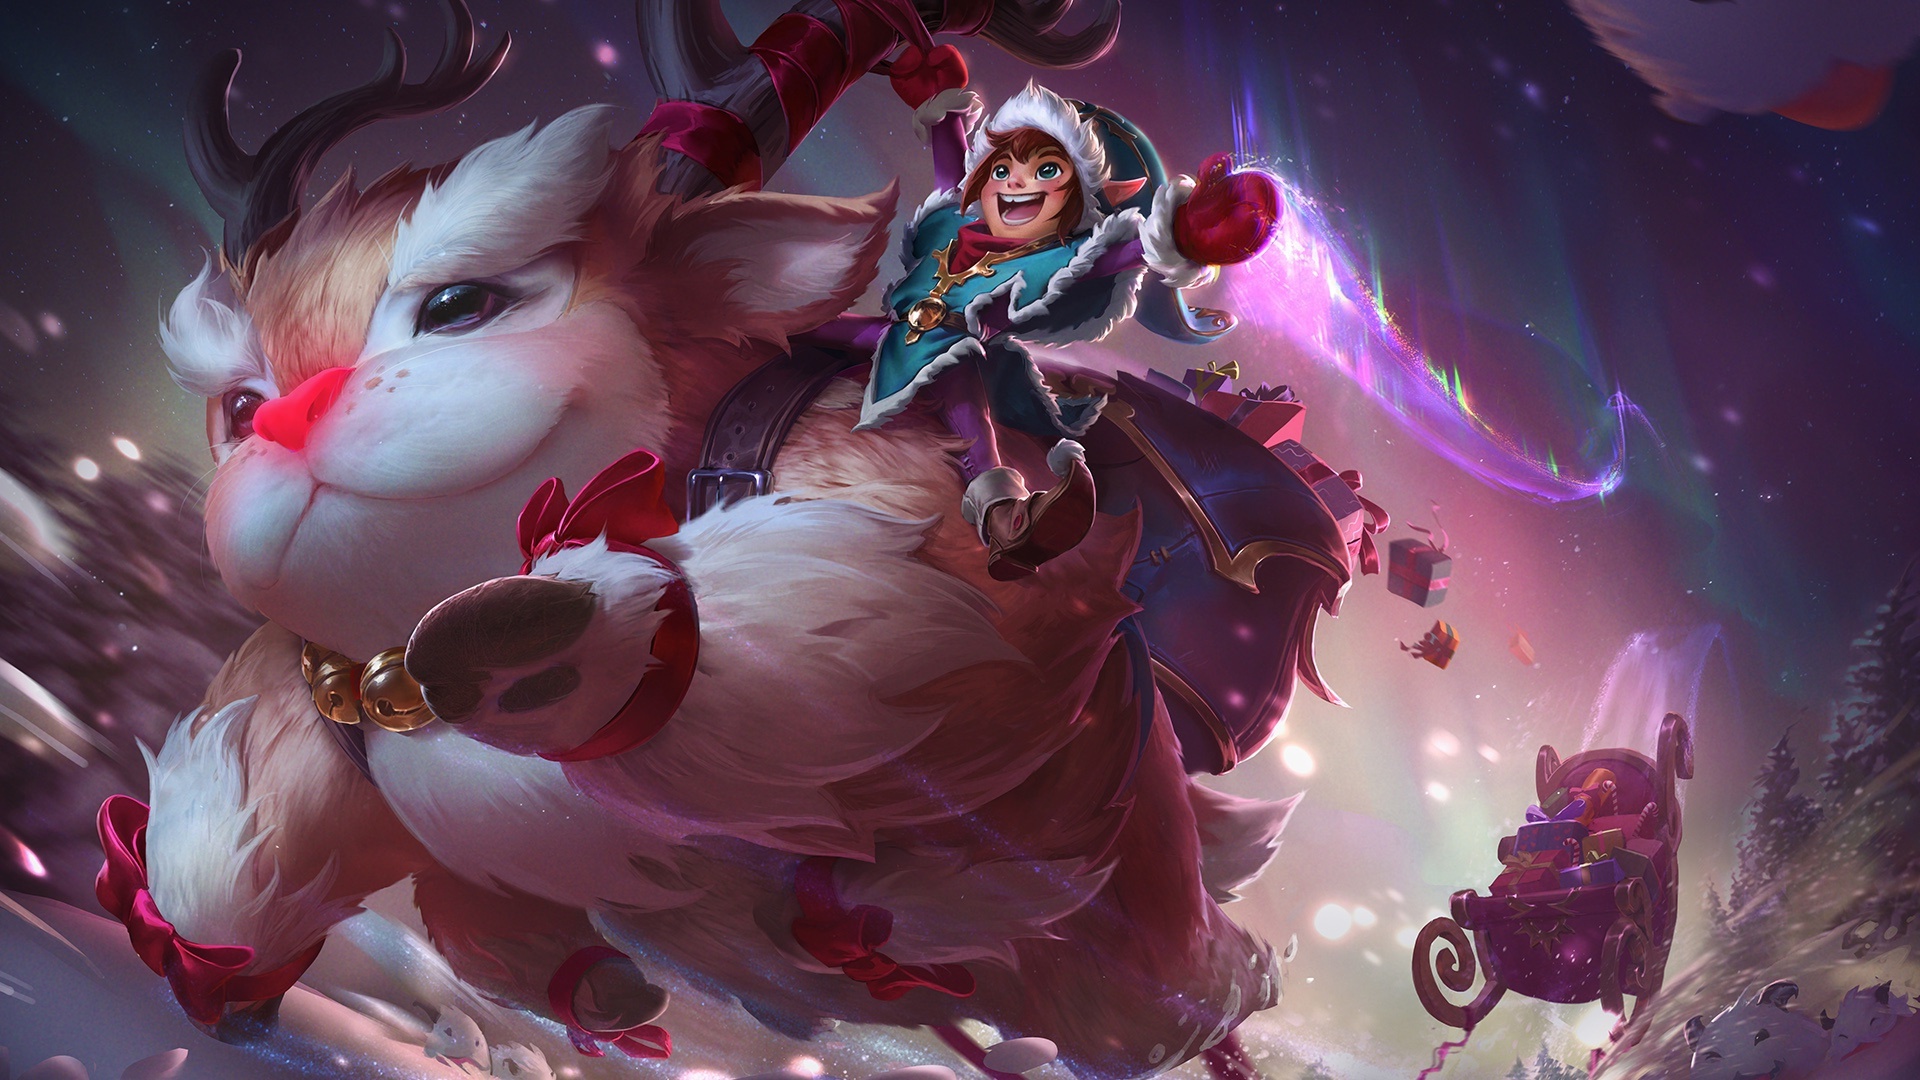 nunu and willump wallpapers wallpaper cave on nunu and willump wallpapers